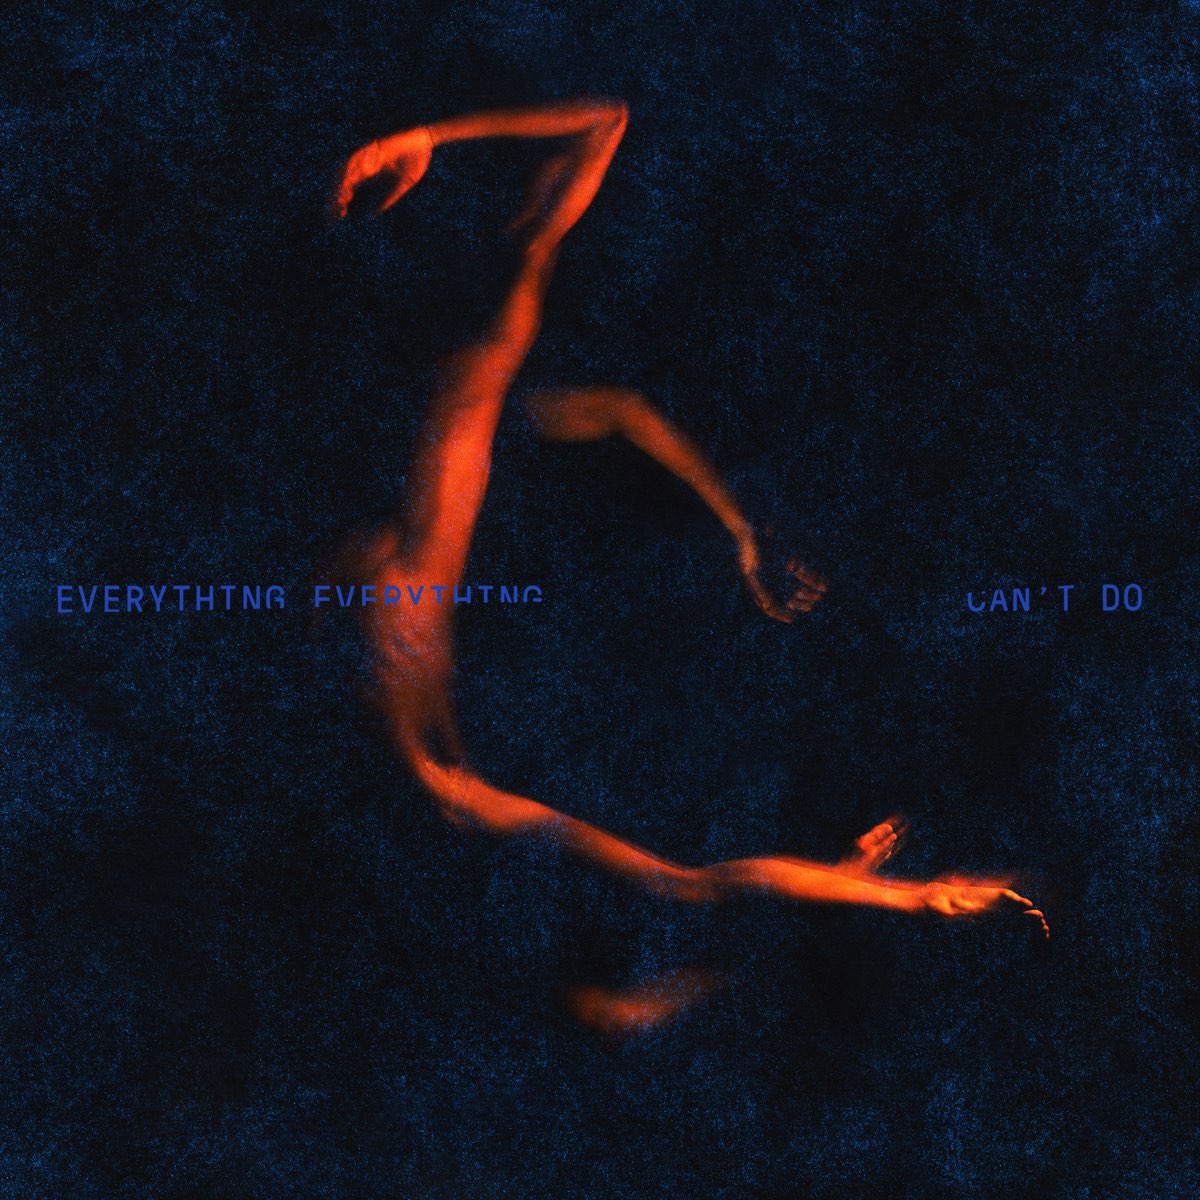 ‎Can't Do - Single by Everything Everything on Apple Music